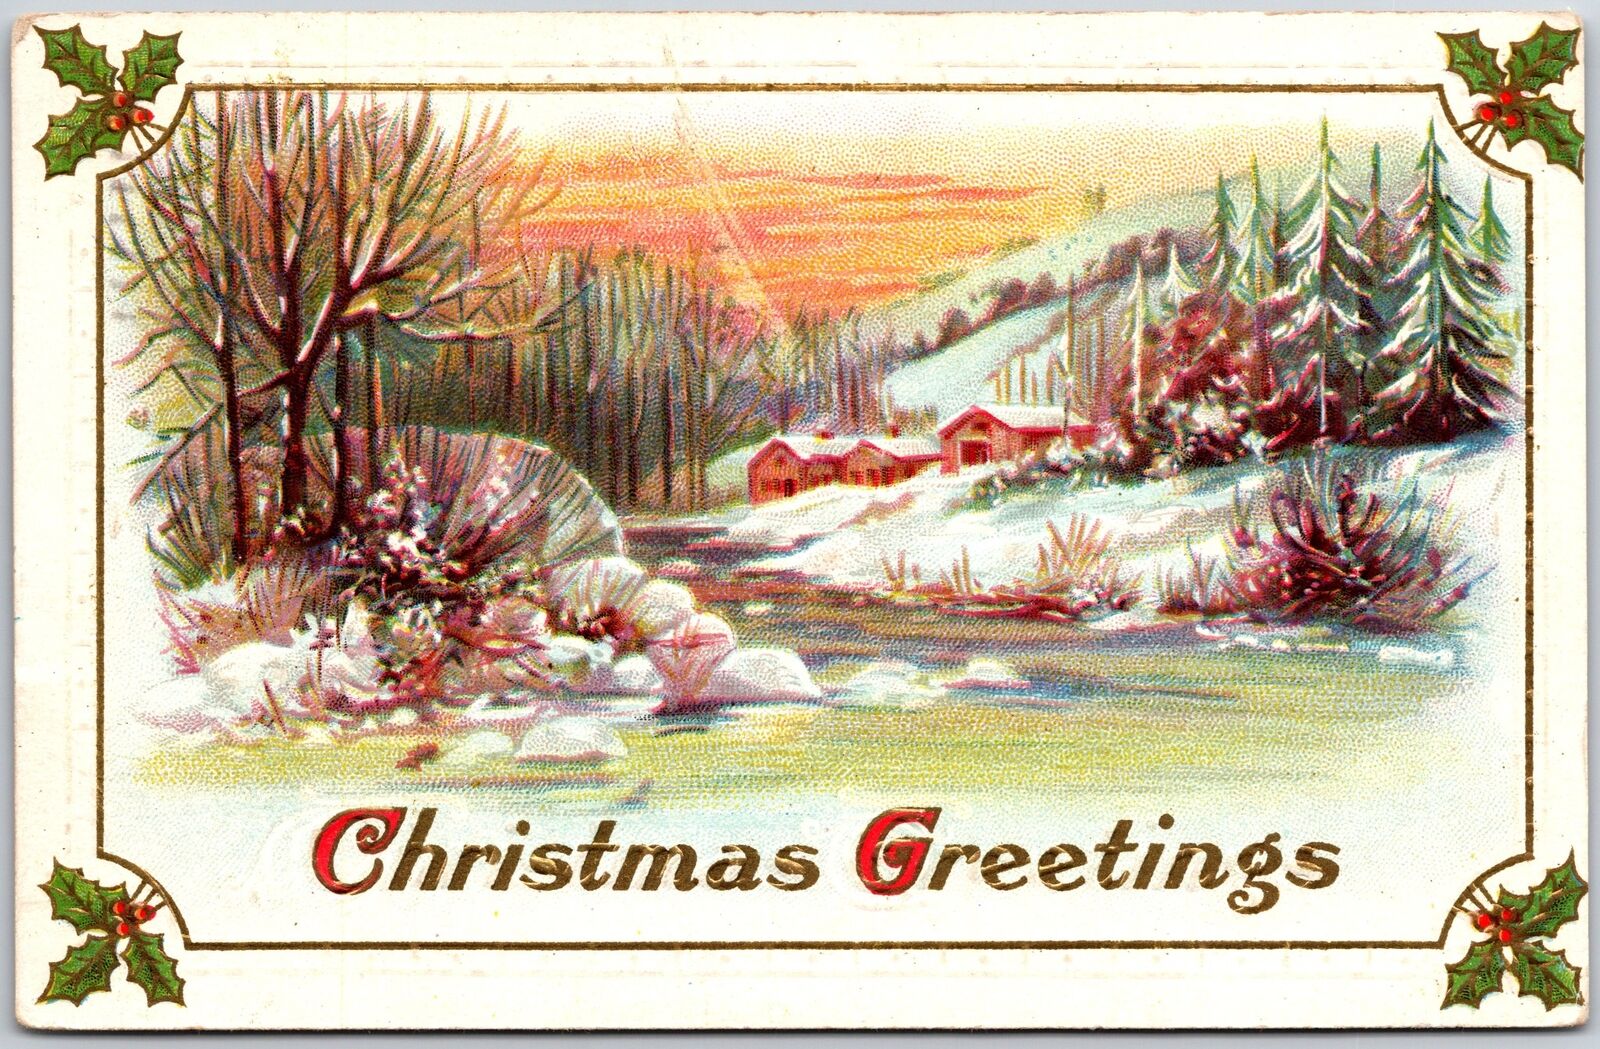 1912 Christmas Greetings Landscape Winter Snow Sunset Posted Postcard